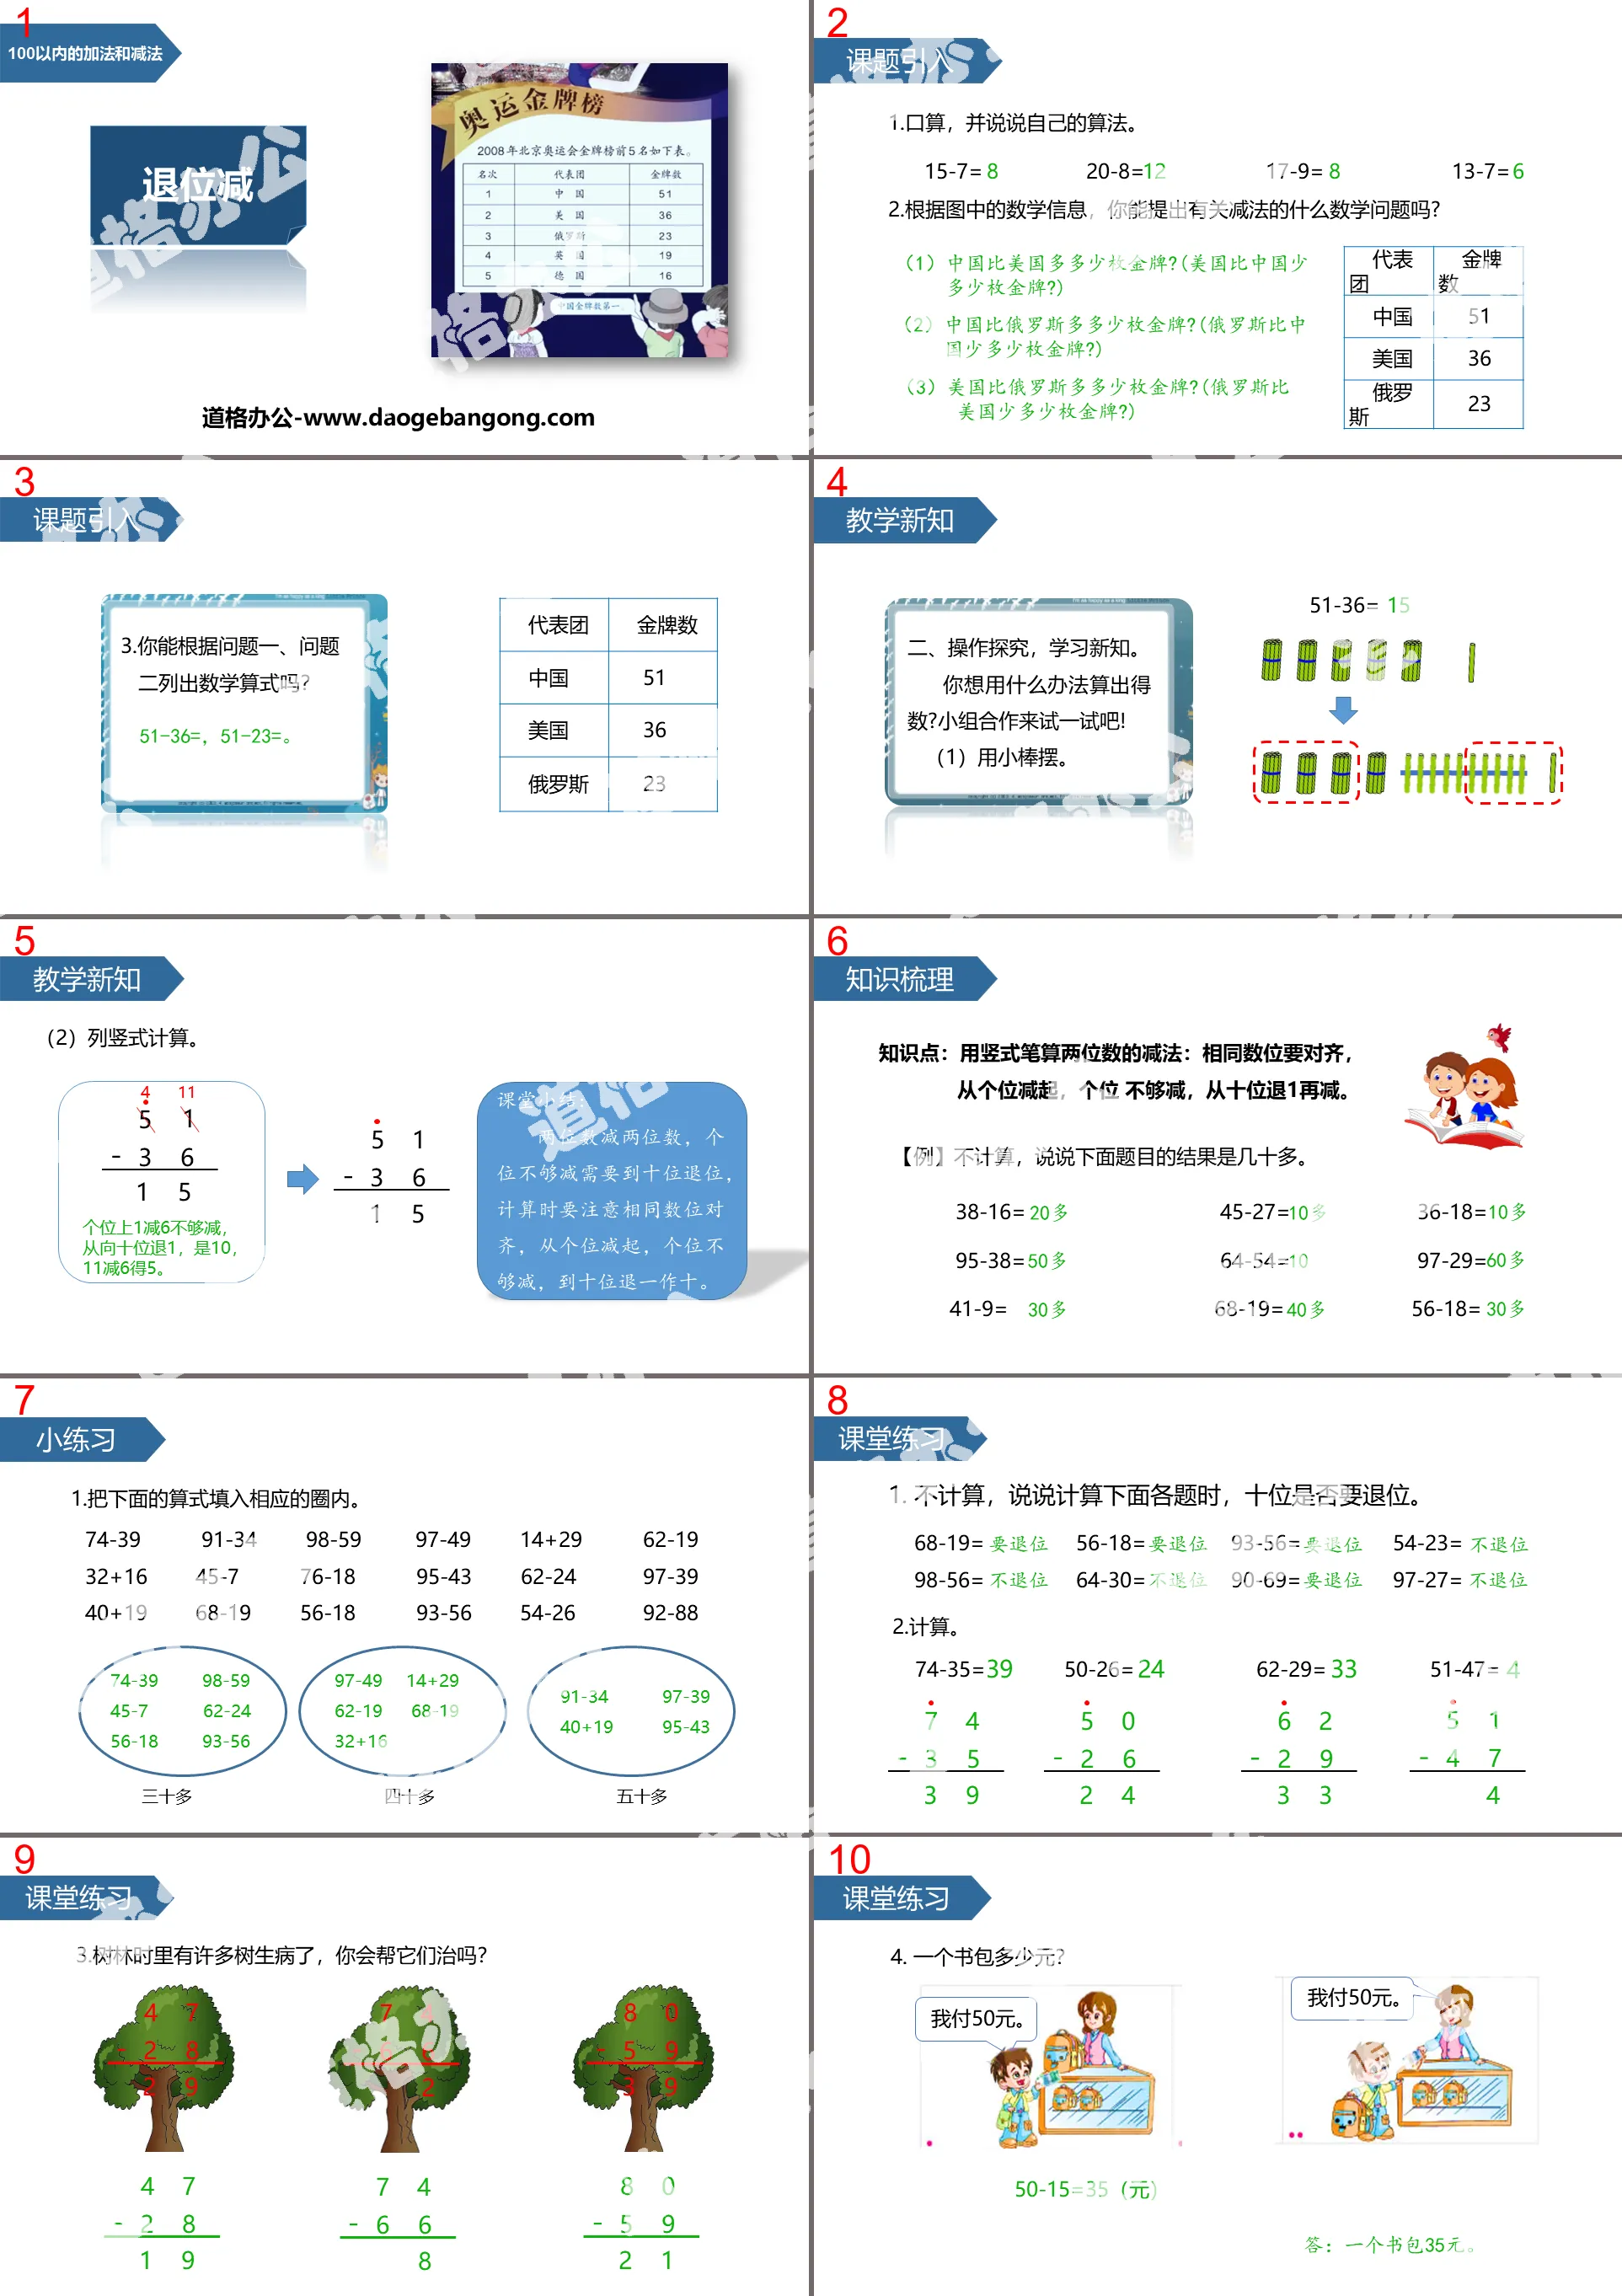 PPT teaching courseware of addition and subtraction within 100 of "Abdication Minus"